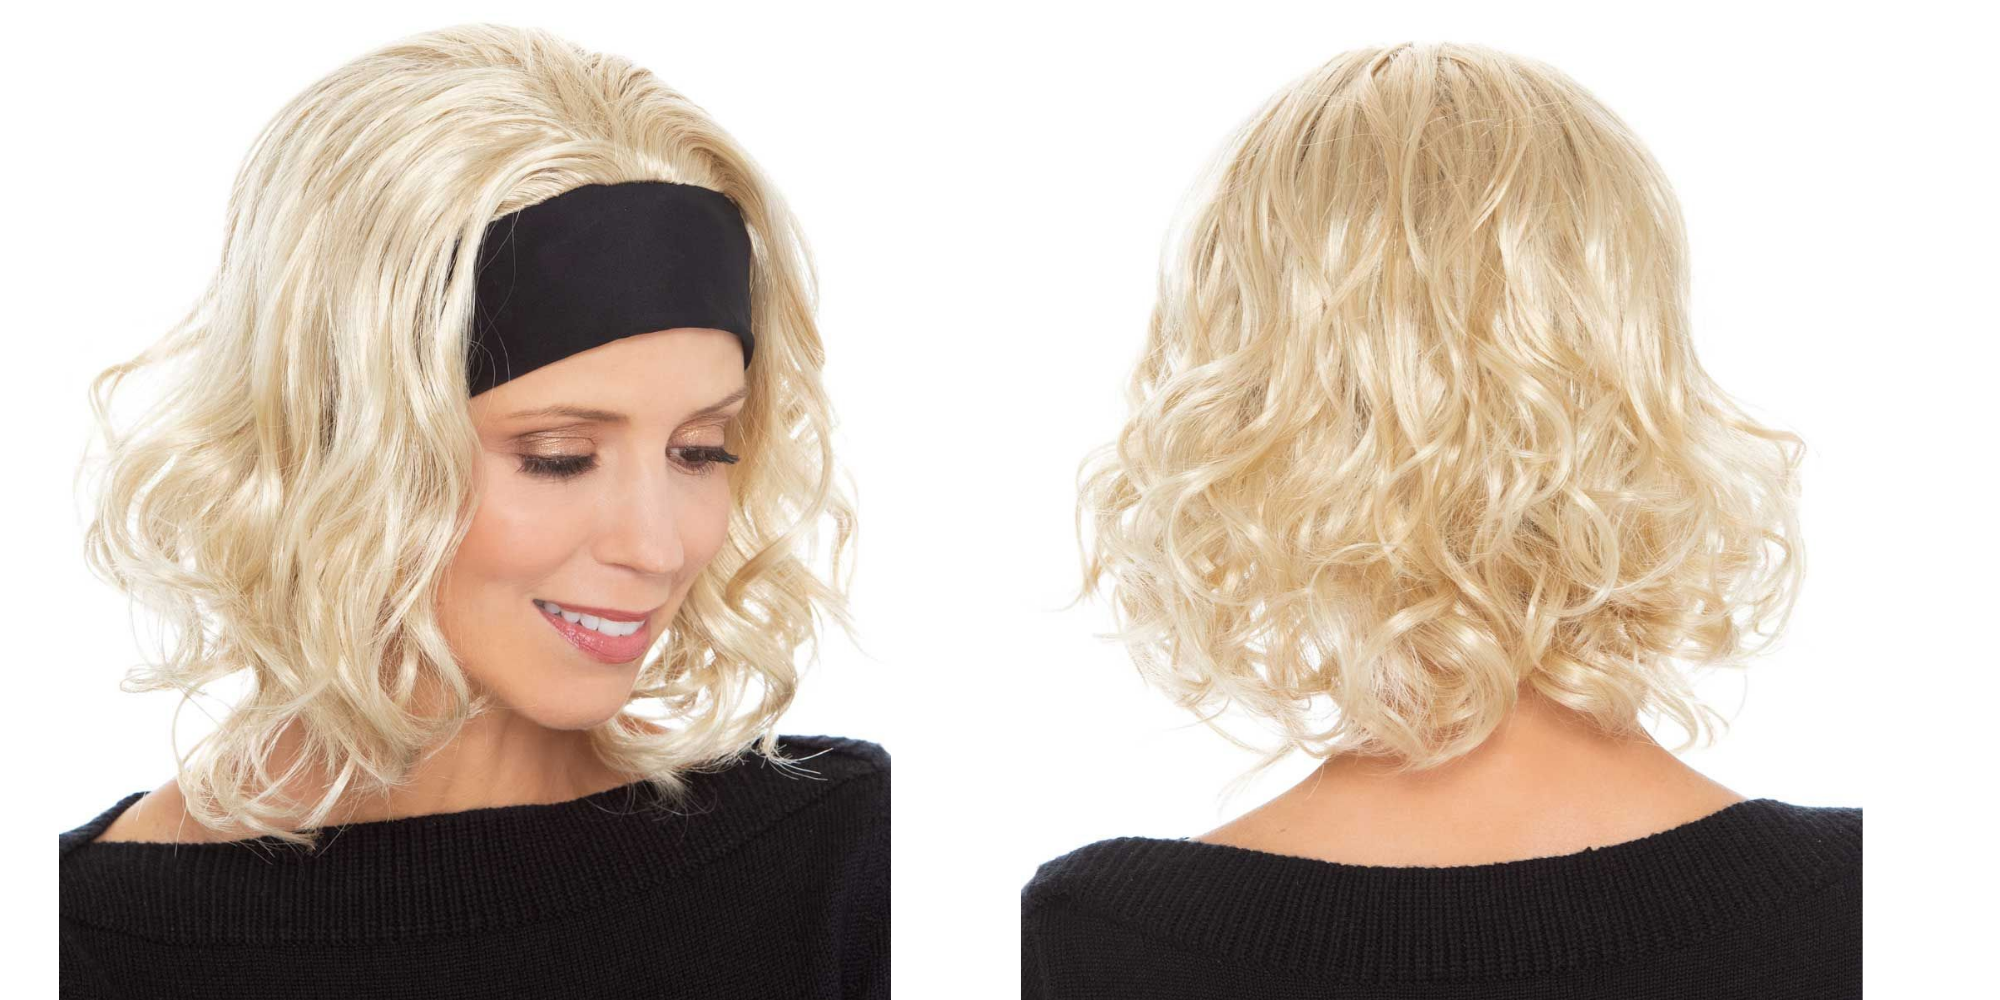 Choose The Best Headband Wig Ultimate User Guide and Benefits